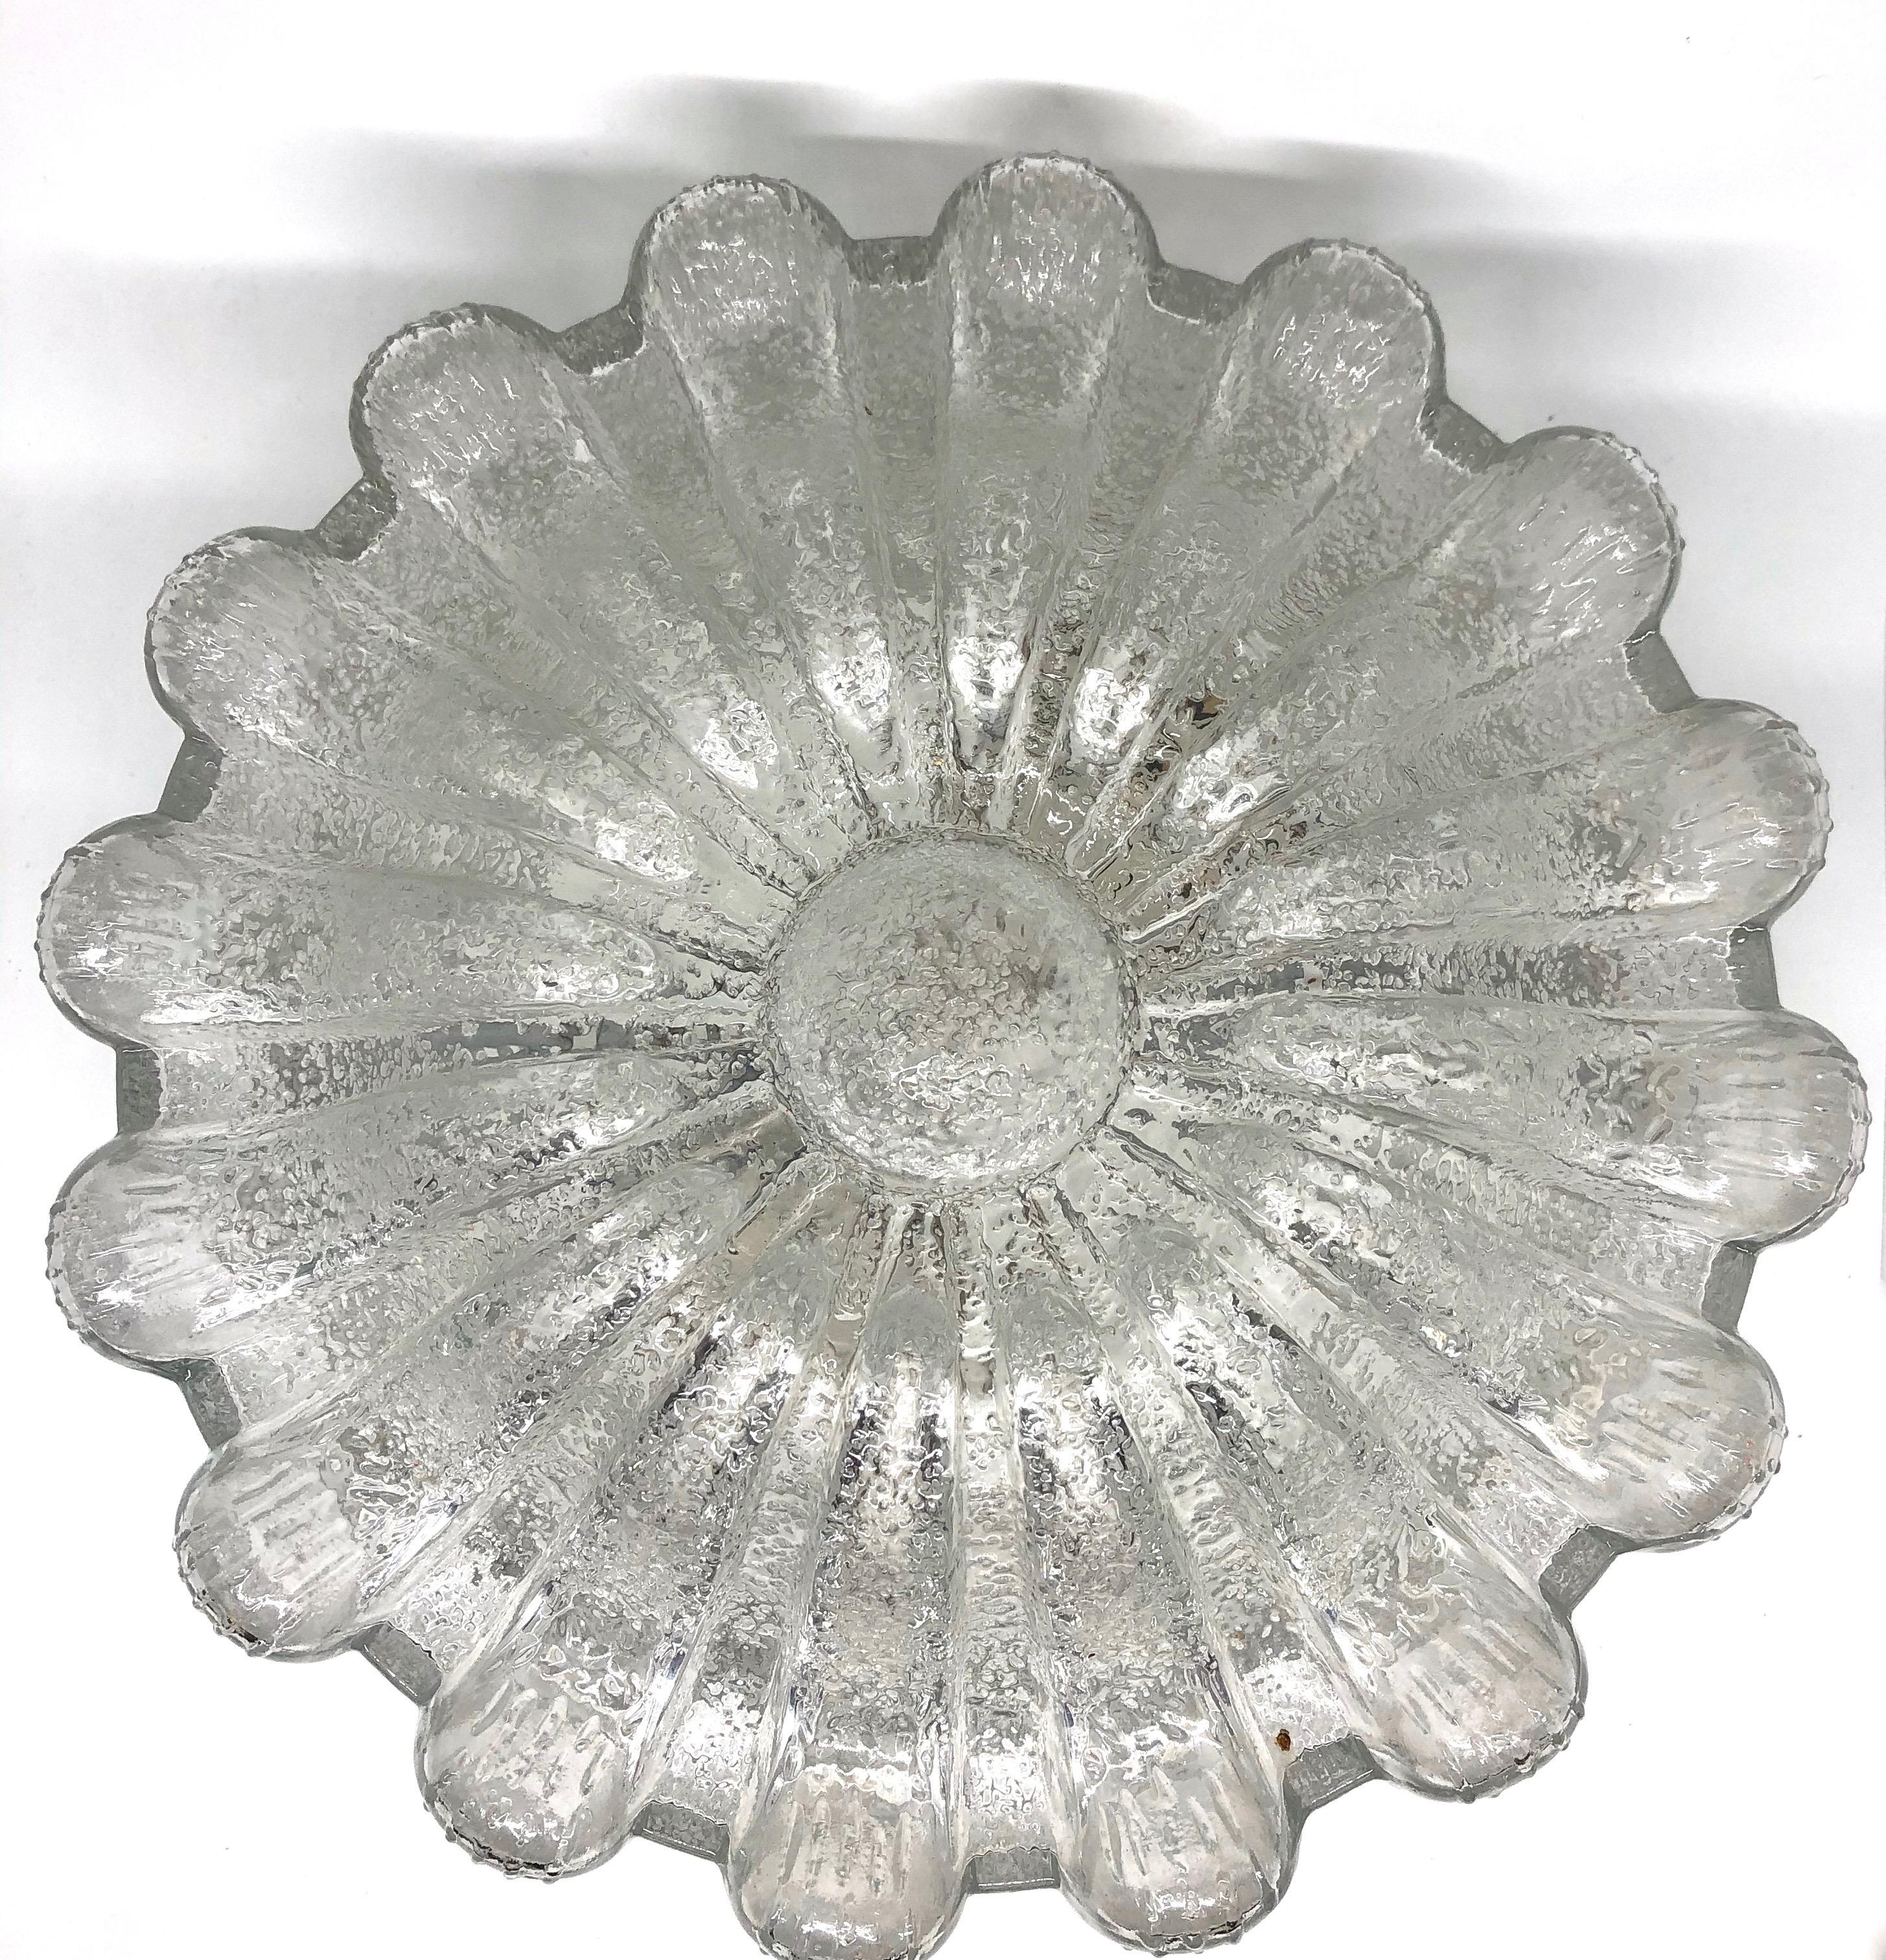 Beautiful flower shape flushmount. Made in Germany by Glashütte Limburg. Gorgeous textured glass flush mount with metal fixture. The glass has a very cute design. The fixture requires two European E27 / 110 volt Edison bulbs, up to 60 watts each.